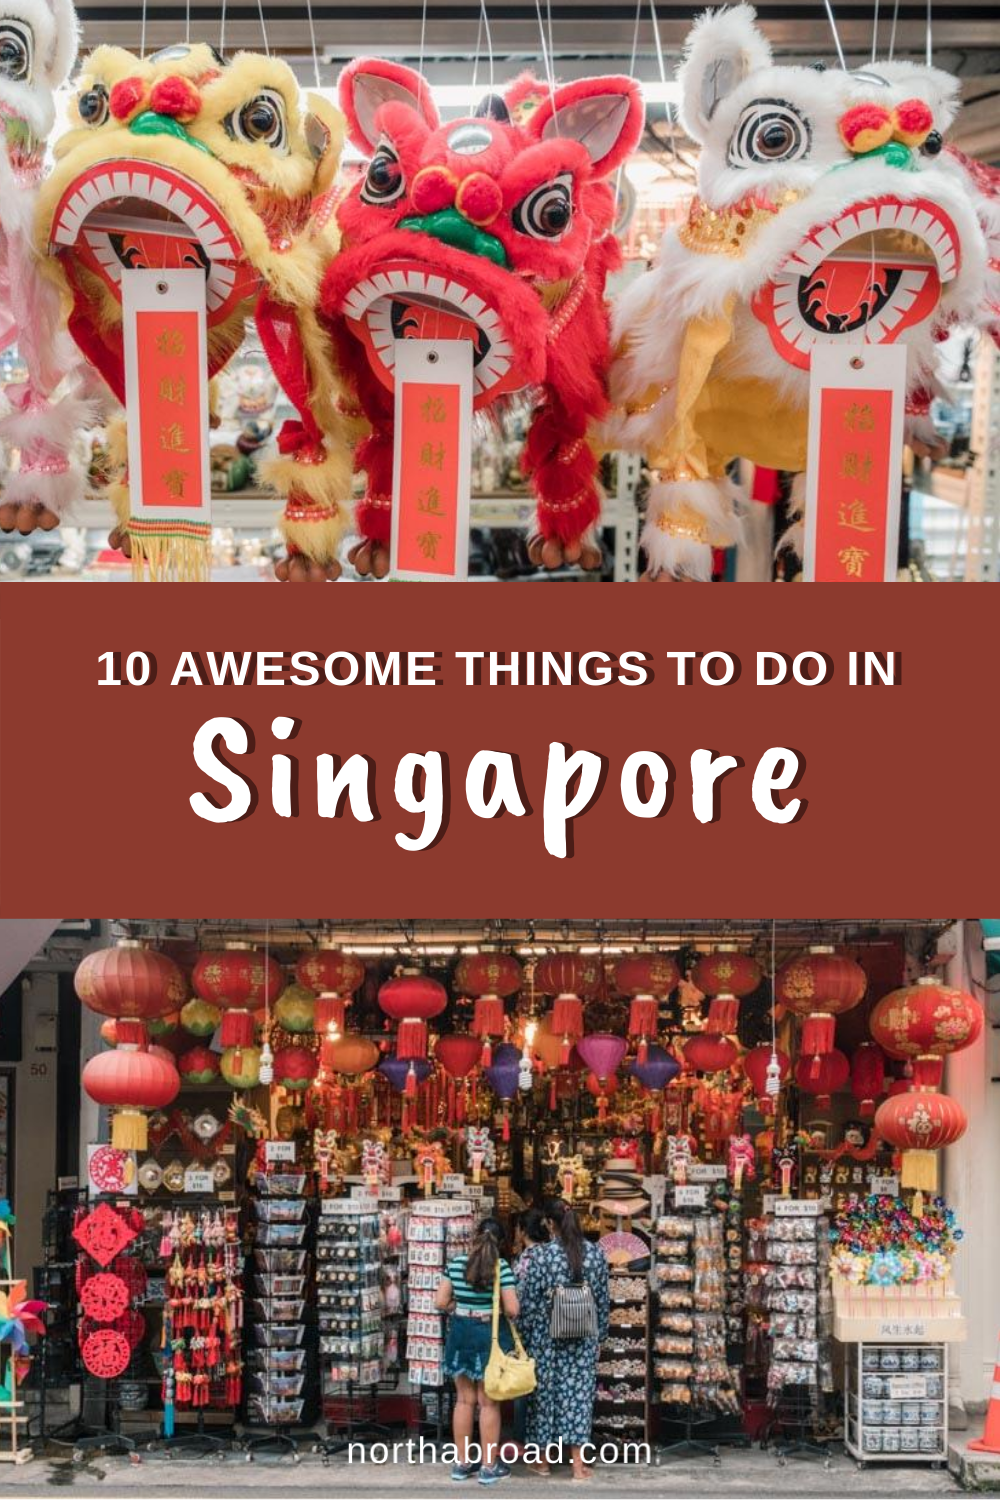 10 Awesome Things to Do in Singapore